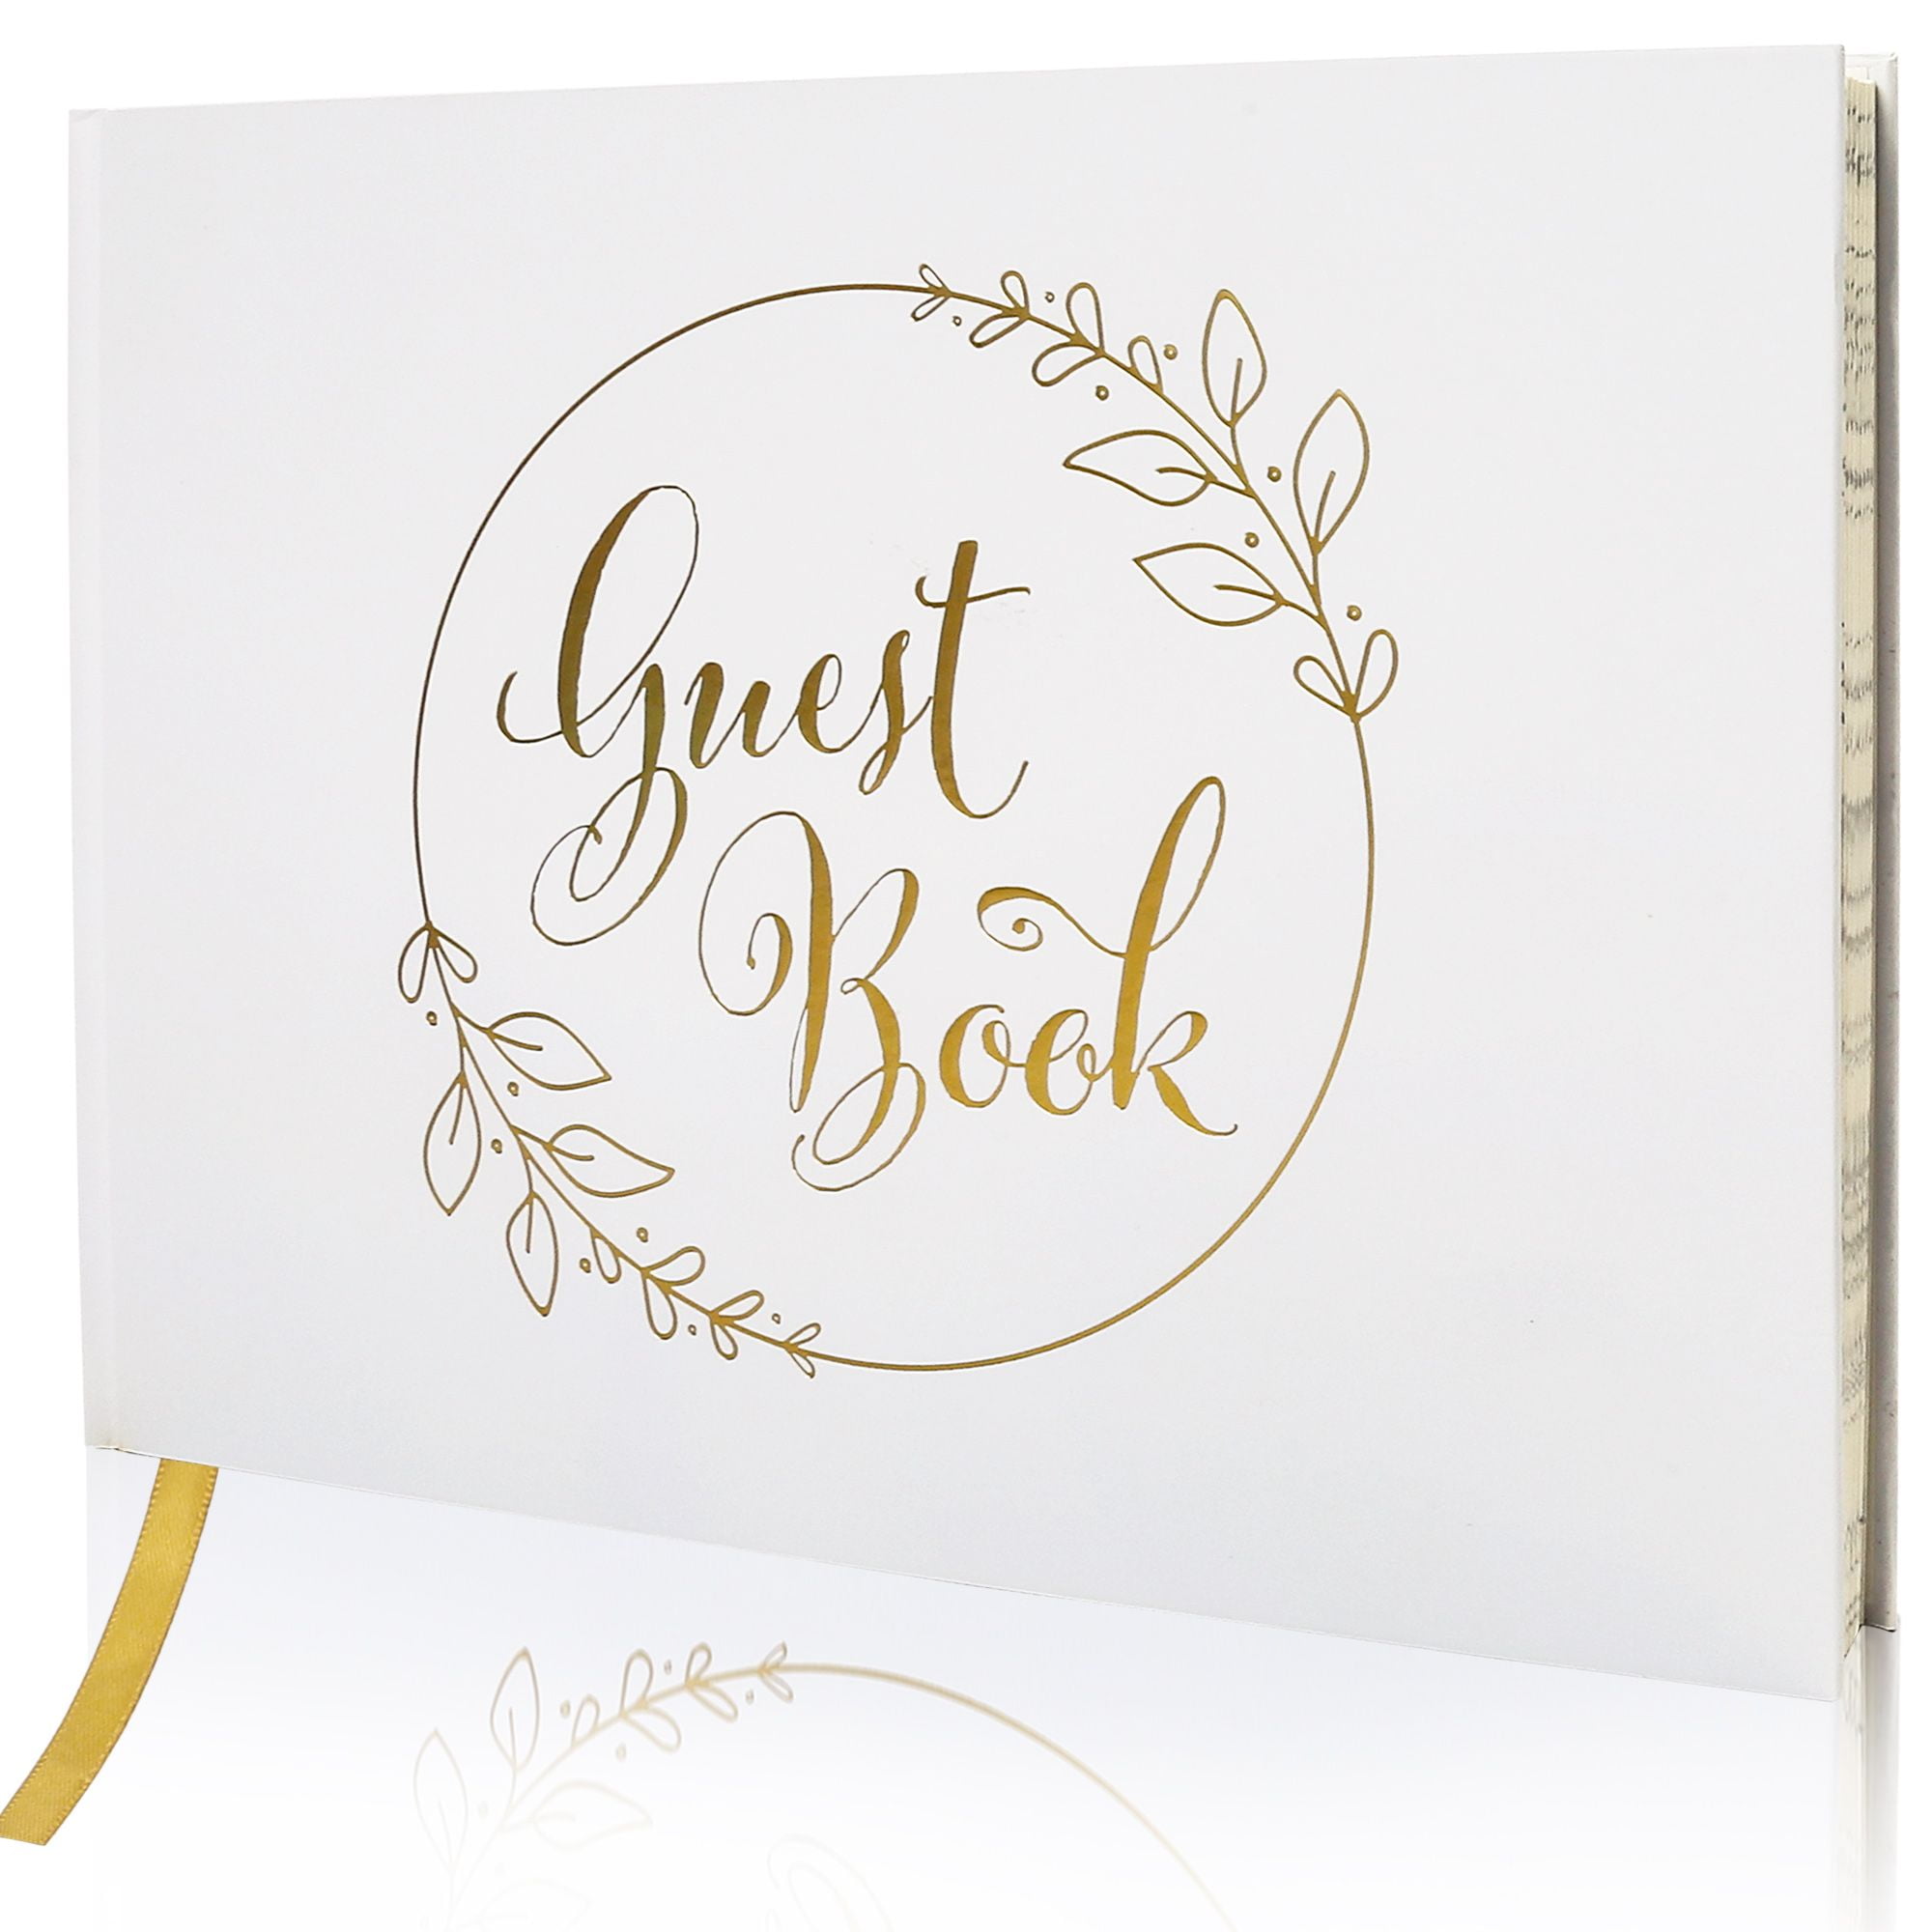 Wedding Guest Book Paper Choices - Paper Bound Love